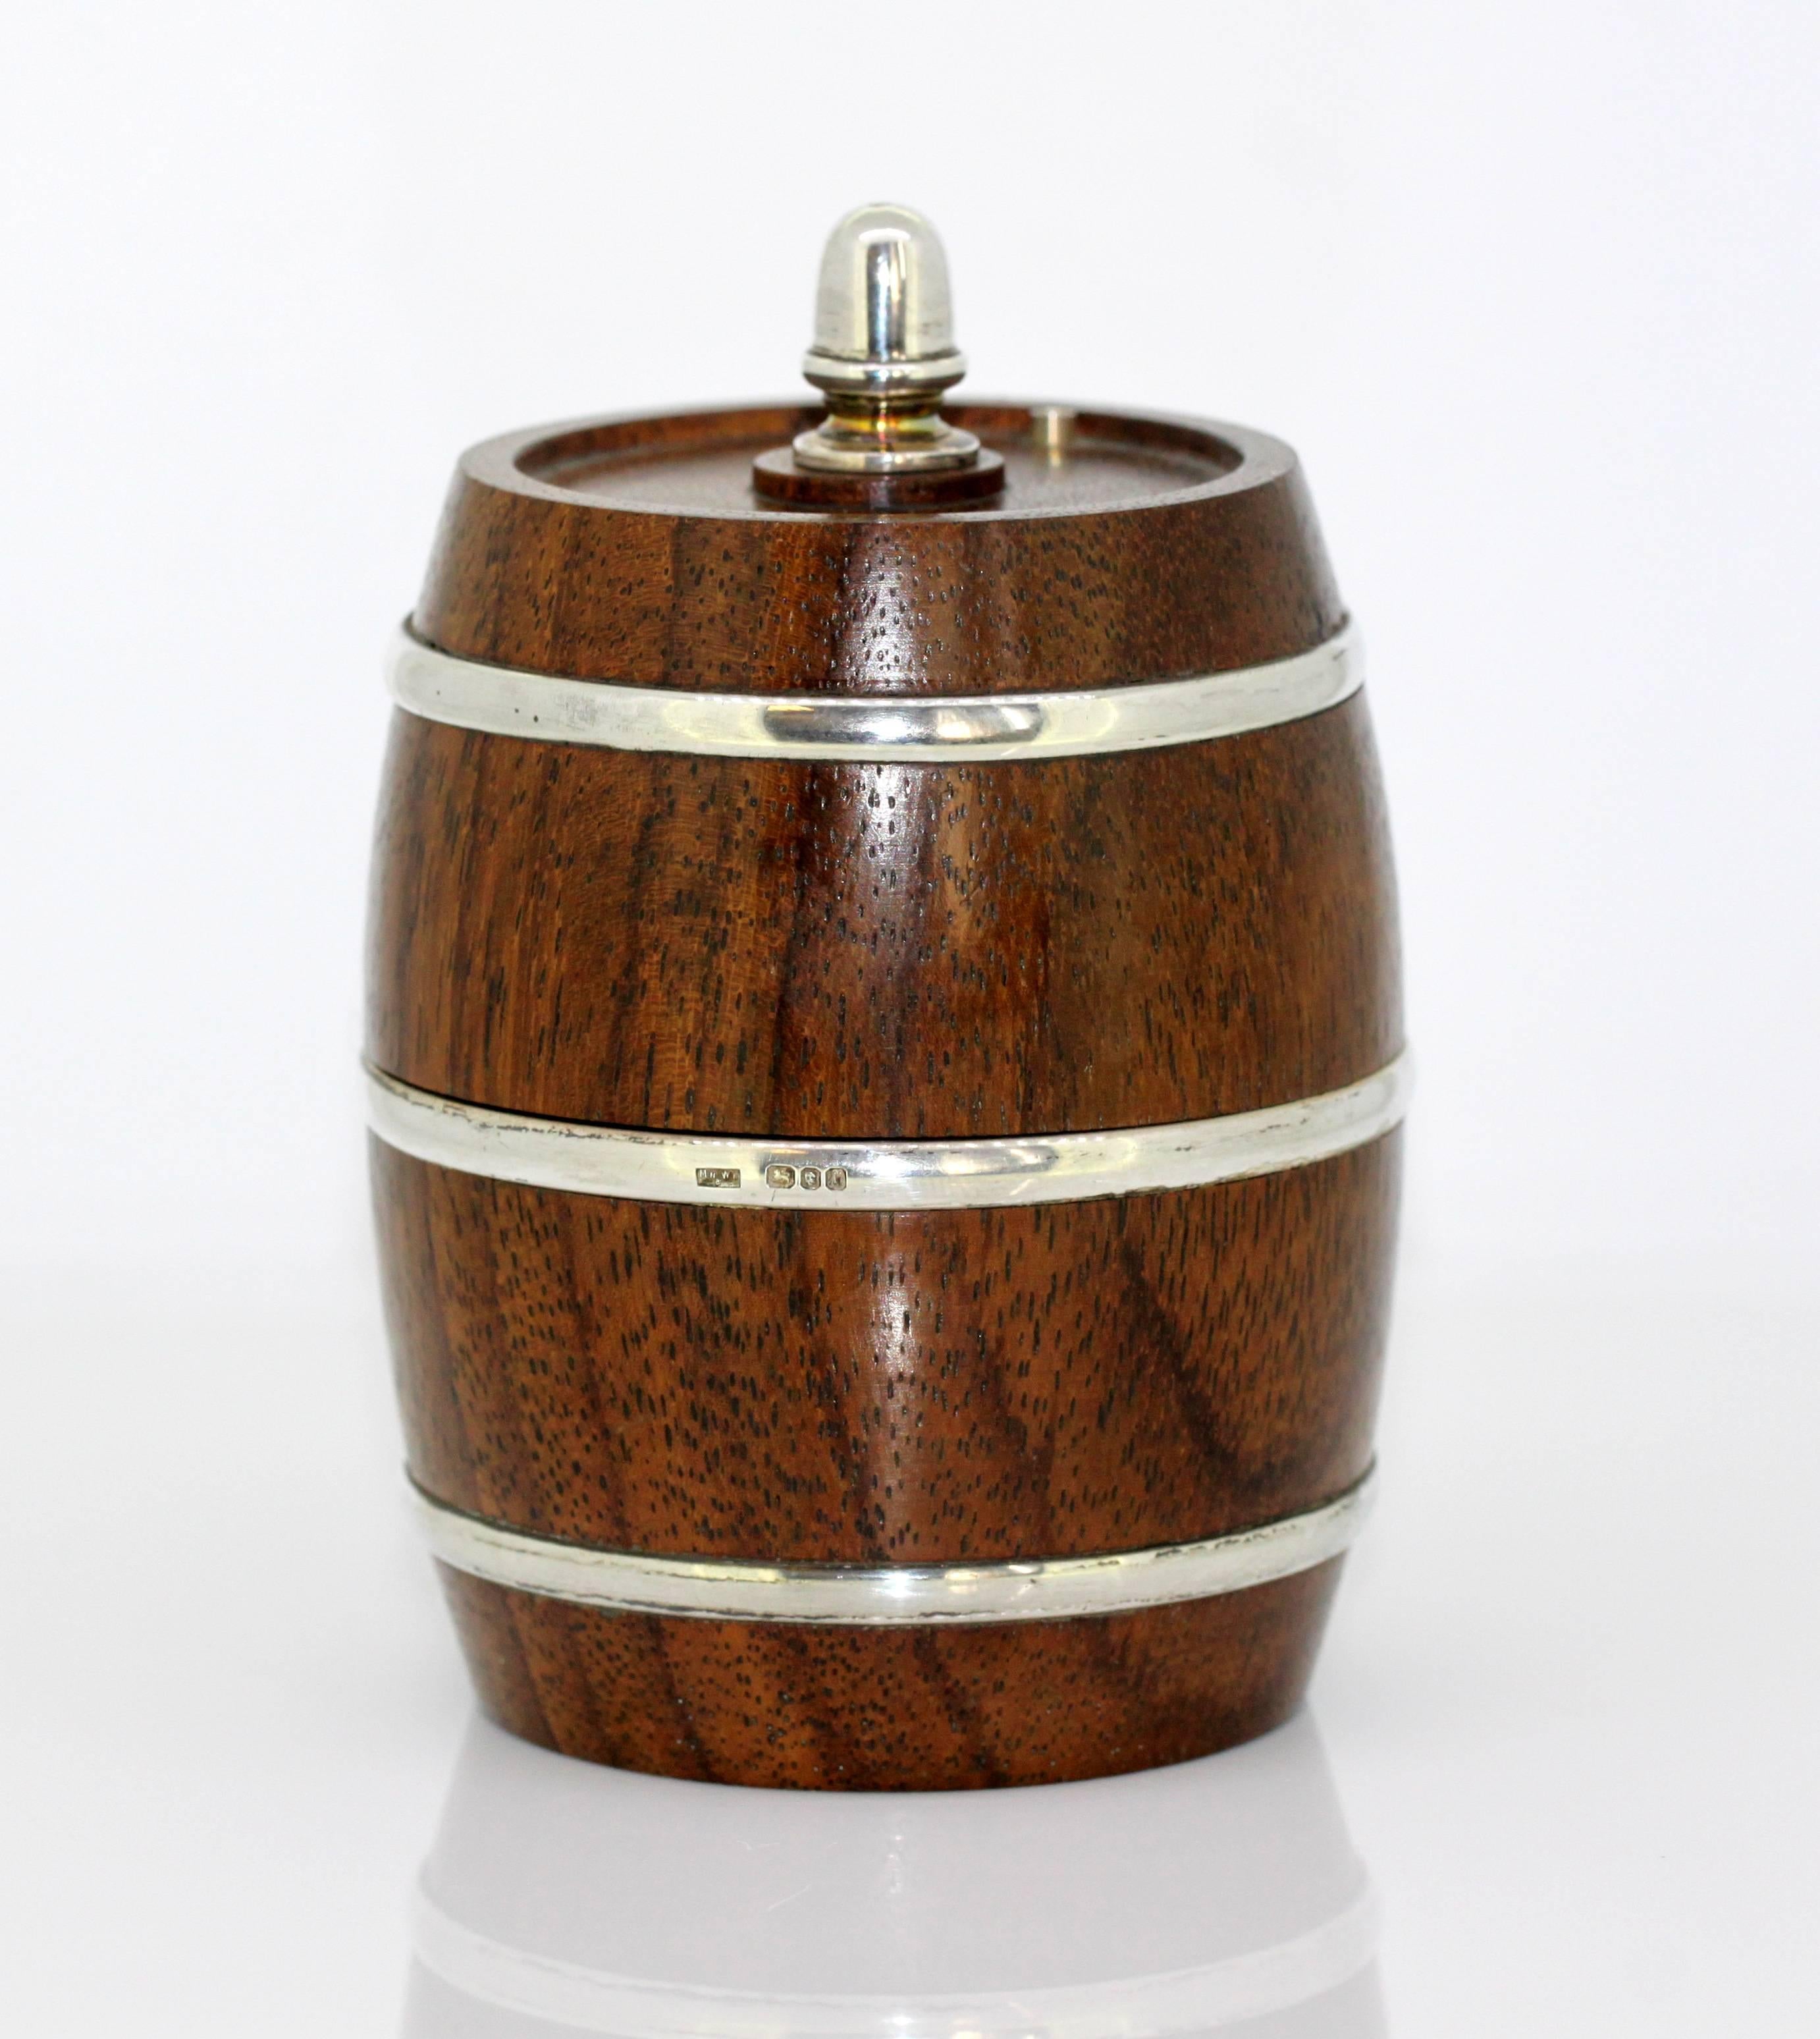 Vintage sterling silver and wood salt grinder in form of barrel
Maker: Mappin & Webb
Made in London 1986
Fully hallmarked.

Approximate dimensions  
Diameter x height 6 x 8.7 cm
Weight 186 grams

Condition: Surface wear and tear from